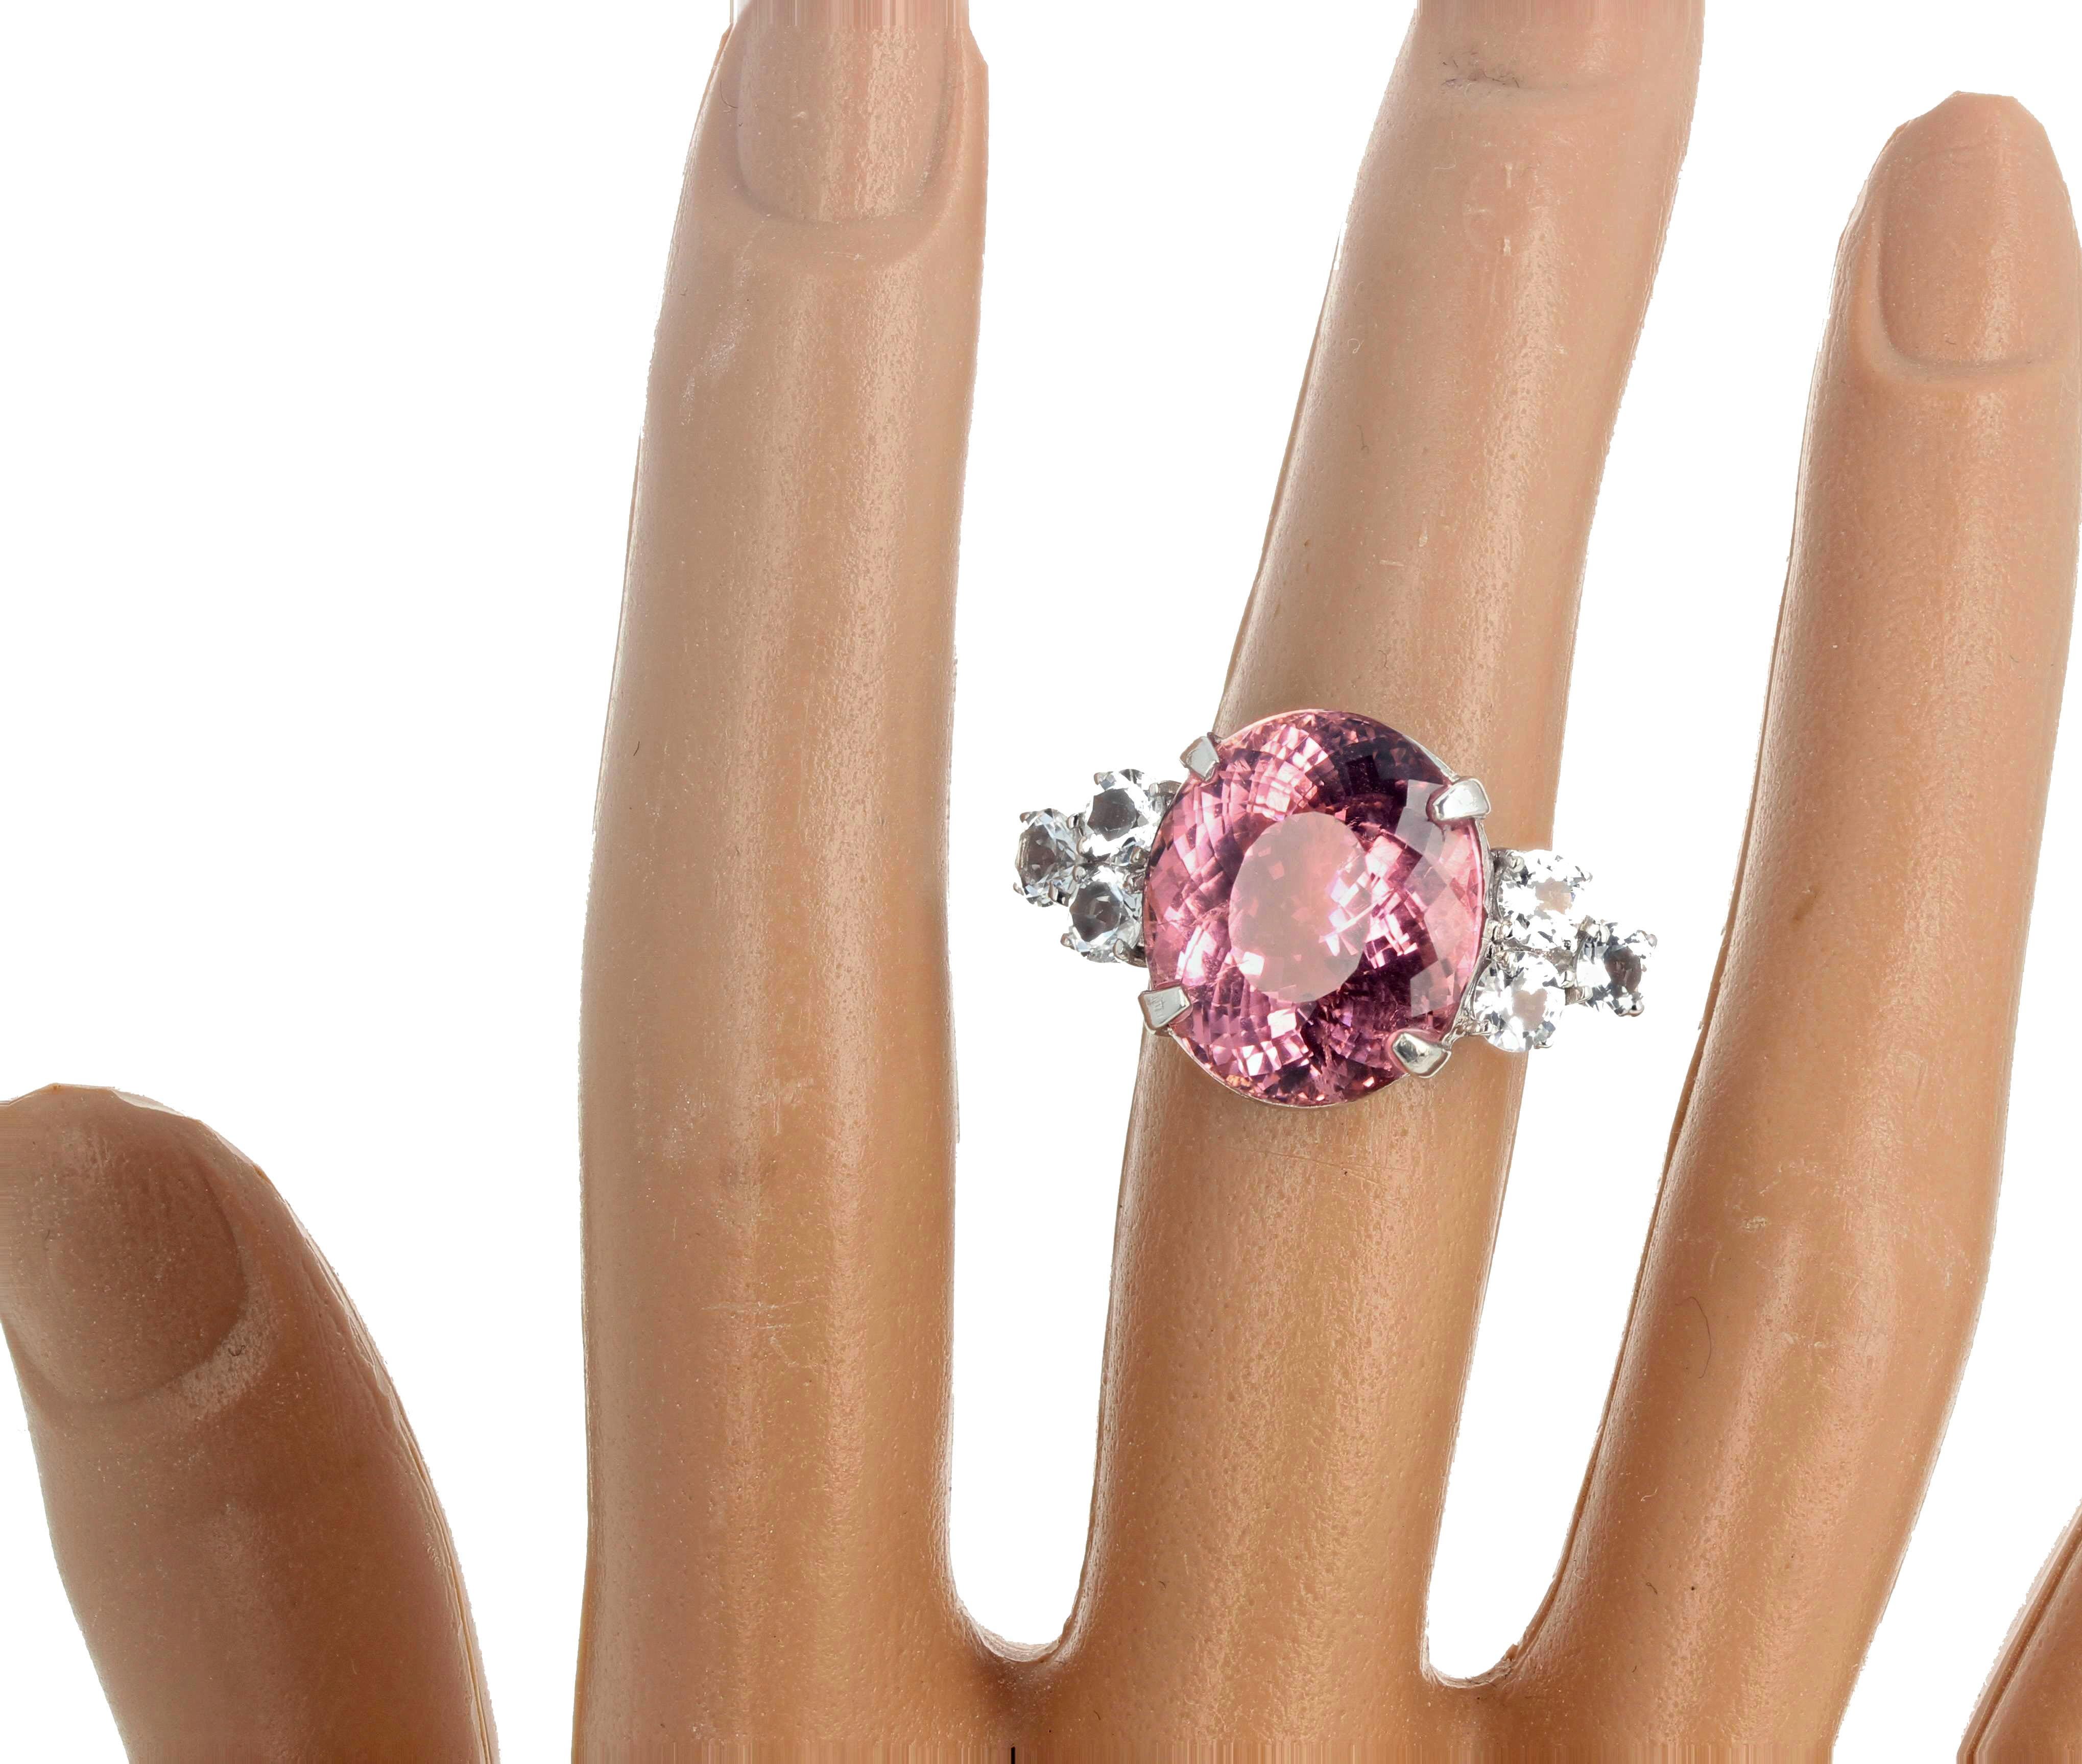 This magnificent 14.38 carat center natural sparkling pink Tourmaline gemstone is offset by six sparkling 1.71 carats of natural white Cambodian sparkling real Zircons.  There are NO eye visible inclusions in this beautiful Tourmaline set in this